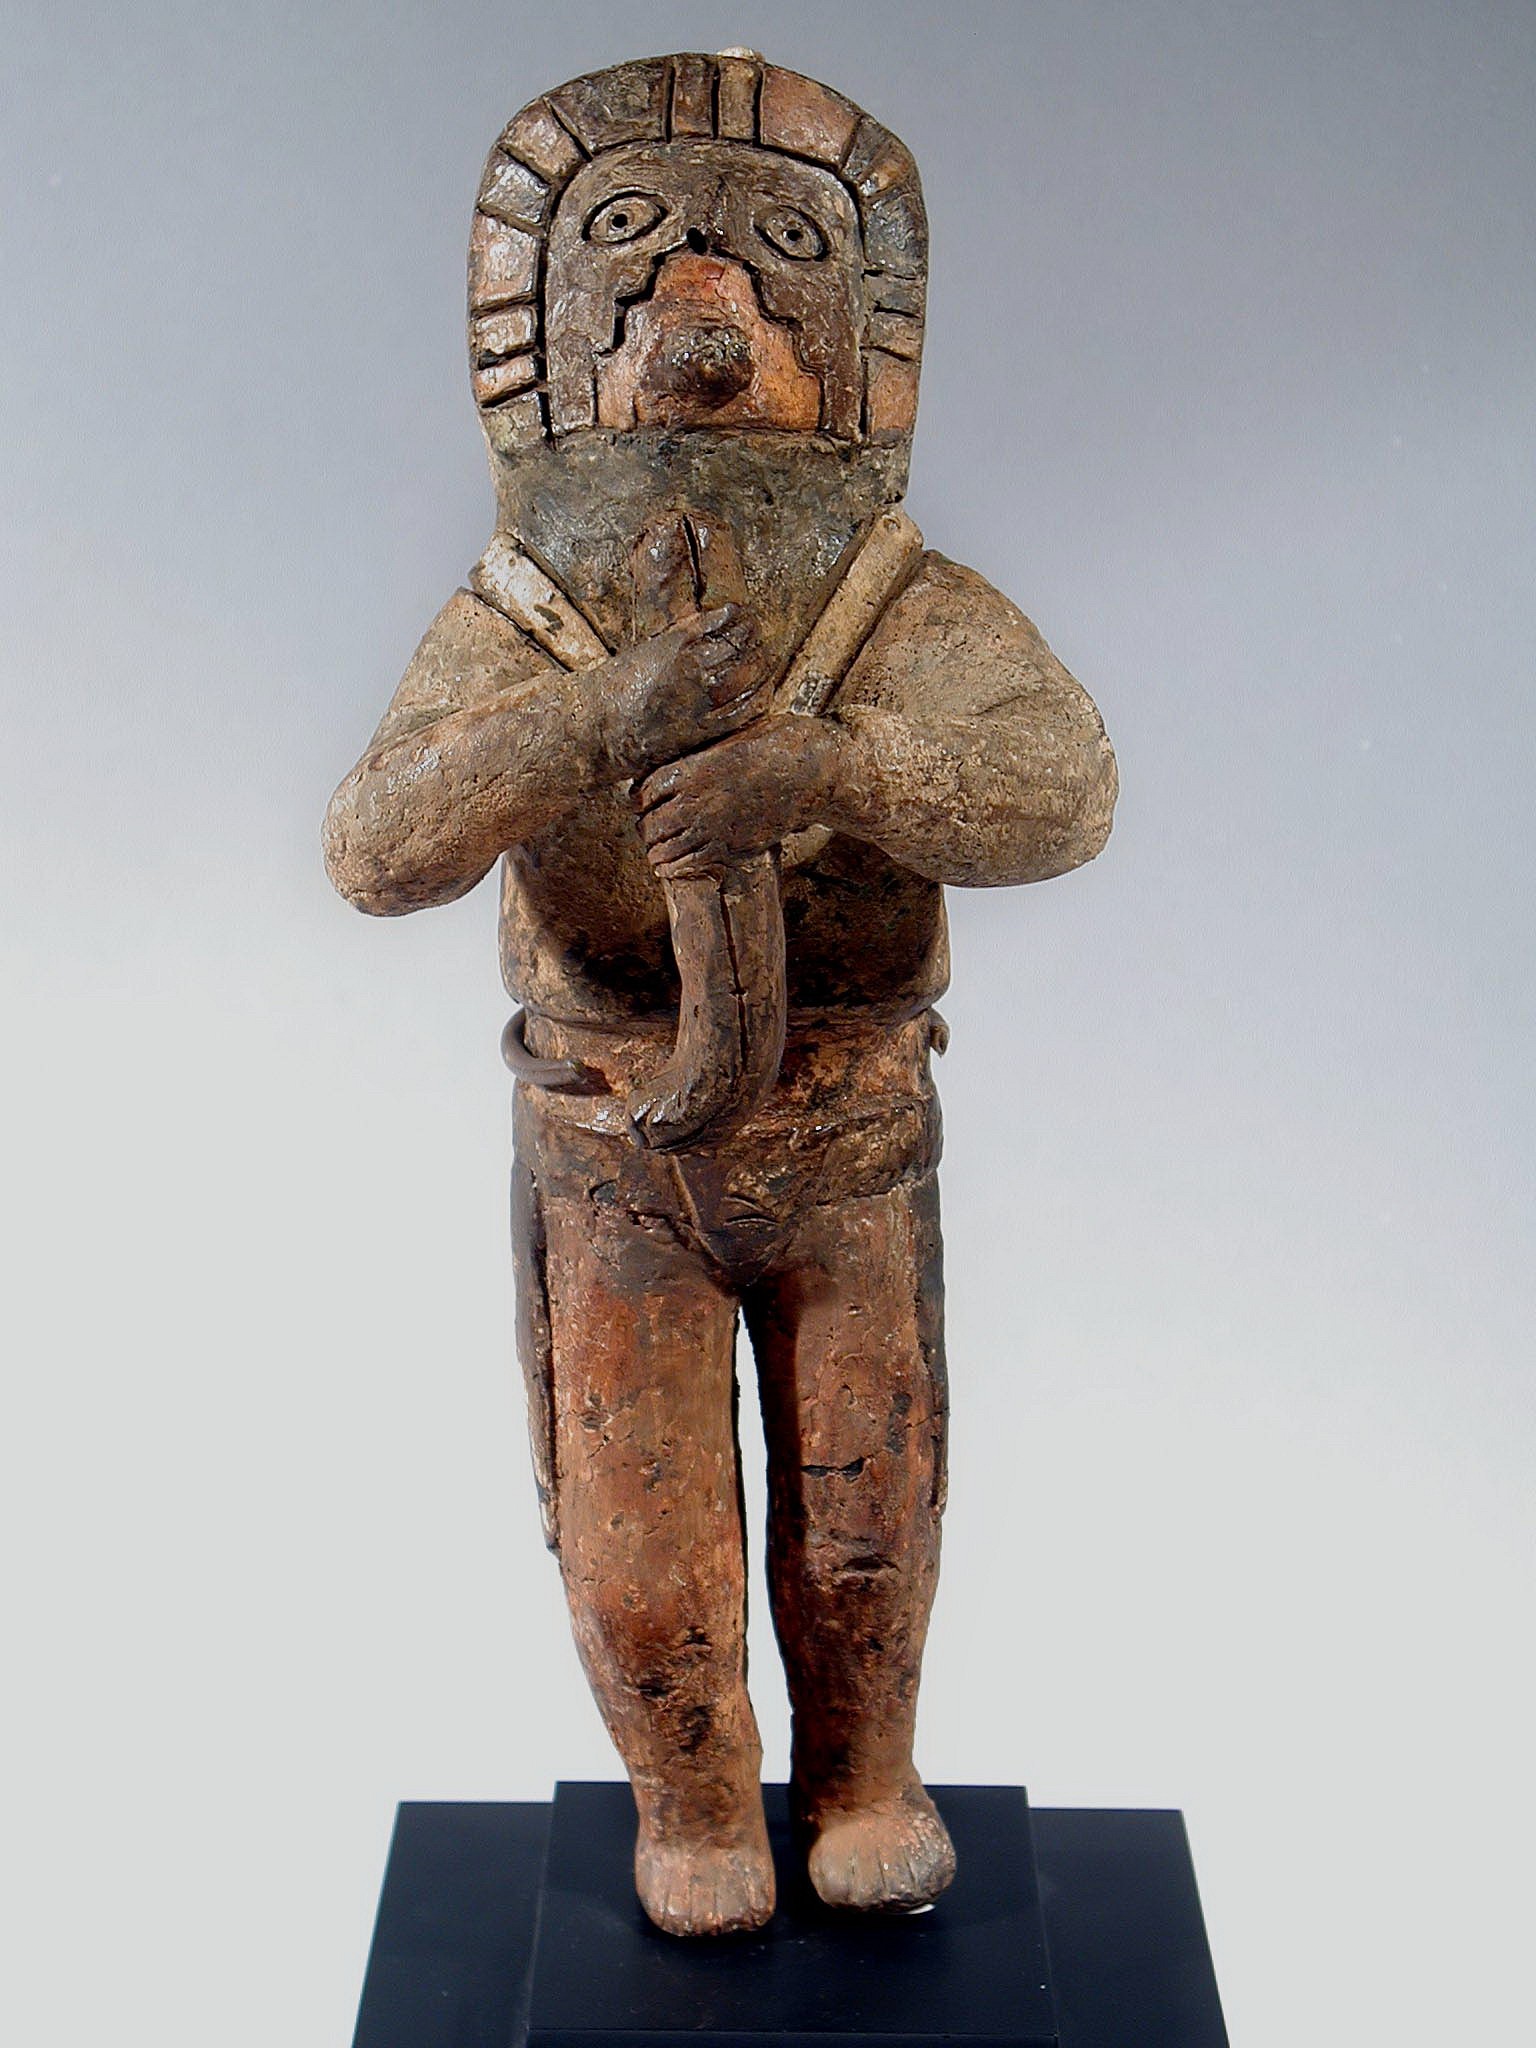 Peru, Chavin carved wood effigy of a shaman
Carved wooden effigy of a standing shaman holding a flute or serpent in front.  The shaman has puckered lips as if he is whistling and appears in a trance like state.  He is wearing a headdress, v neck tunic and belt with two long devices hanging down along the outside of each leg.  On the back of the belt is a "U" shaped device of unknown use.  From the top of the head emeniates a bone tube which has been broken.   A similar shaman's face is illustrated in PRECOLUMBIAN ART OF SOUTH AMERICA by Alan Lapiner fig. 13.    Wooden effigy figures are extremely rare and do not survive well.   The left leg was broken off and re-attached and the evidence of age was apparent.
Media: Wood
Dimensions: Height 9.1/2"
Price Upon Request
95057